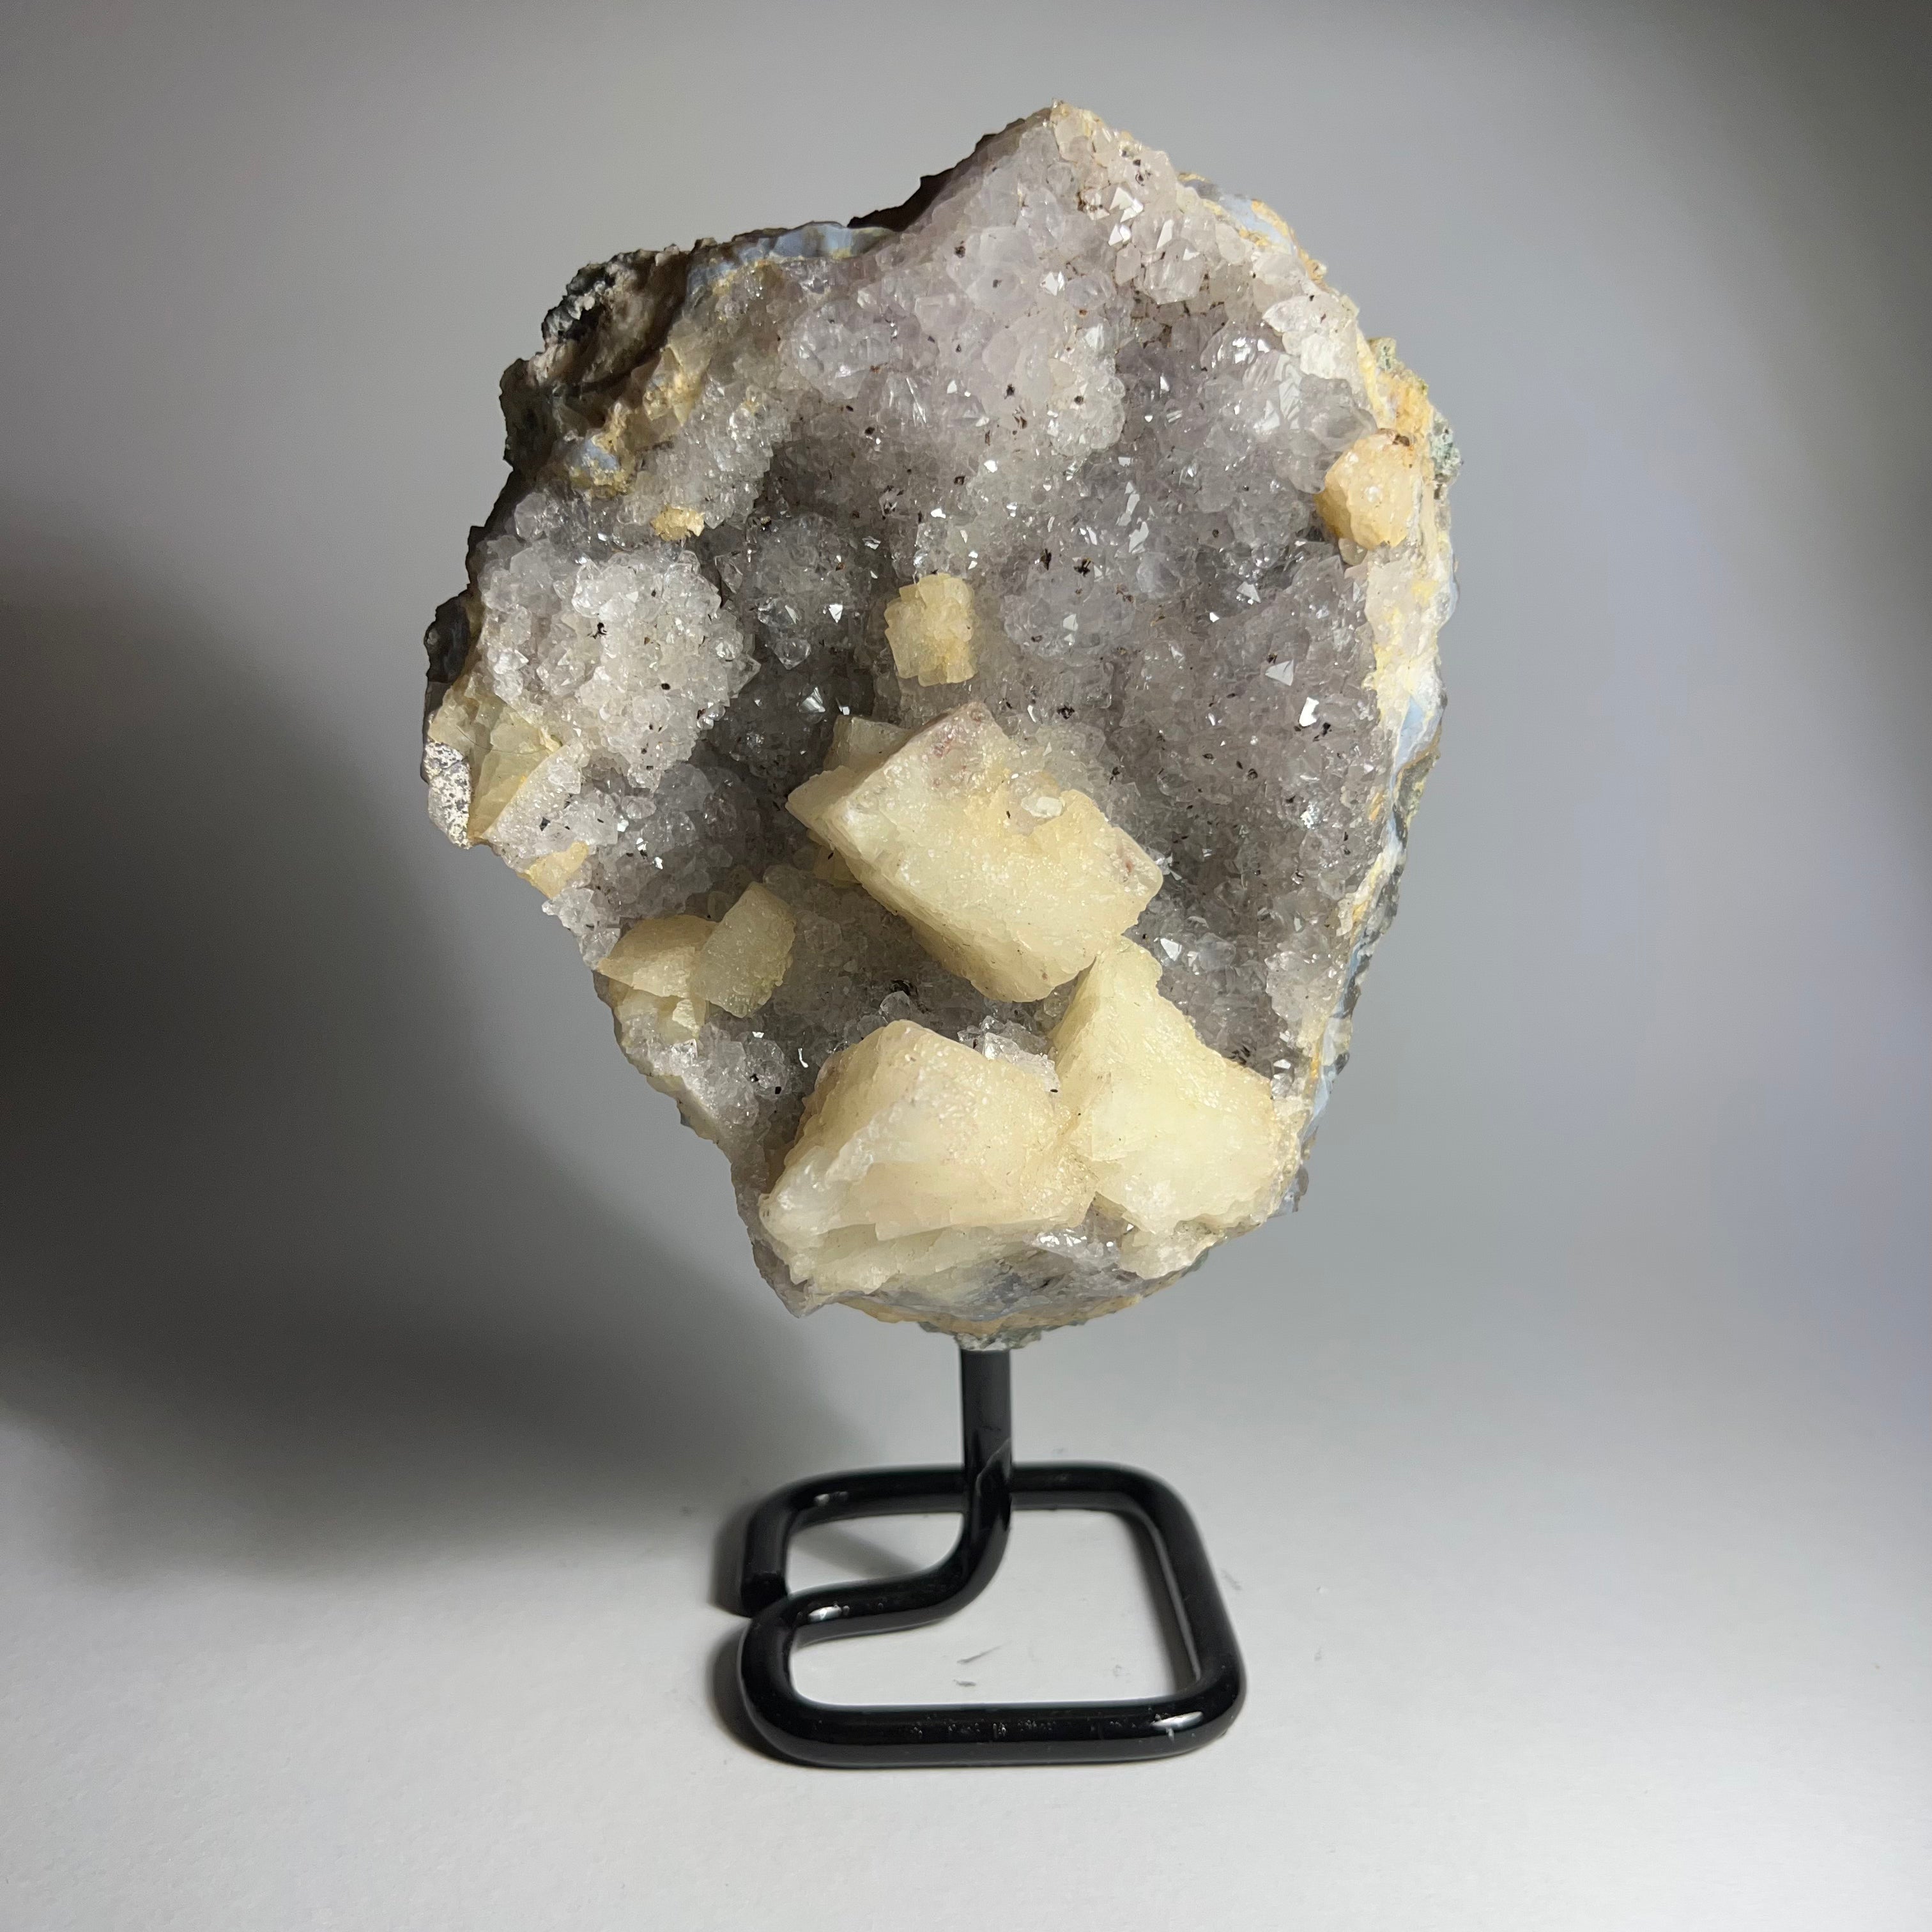 Amethyst and Calcite on stand